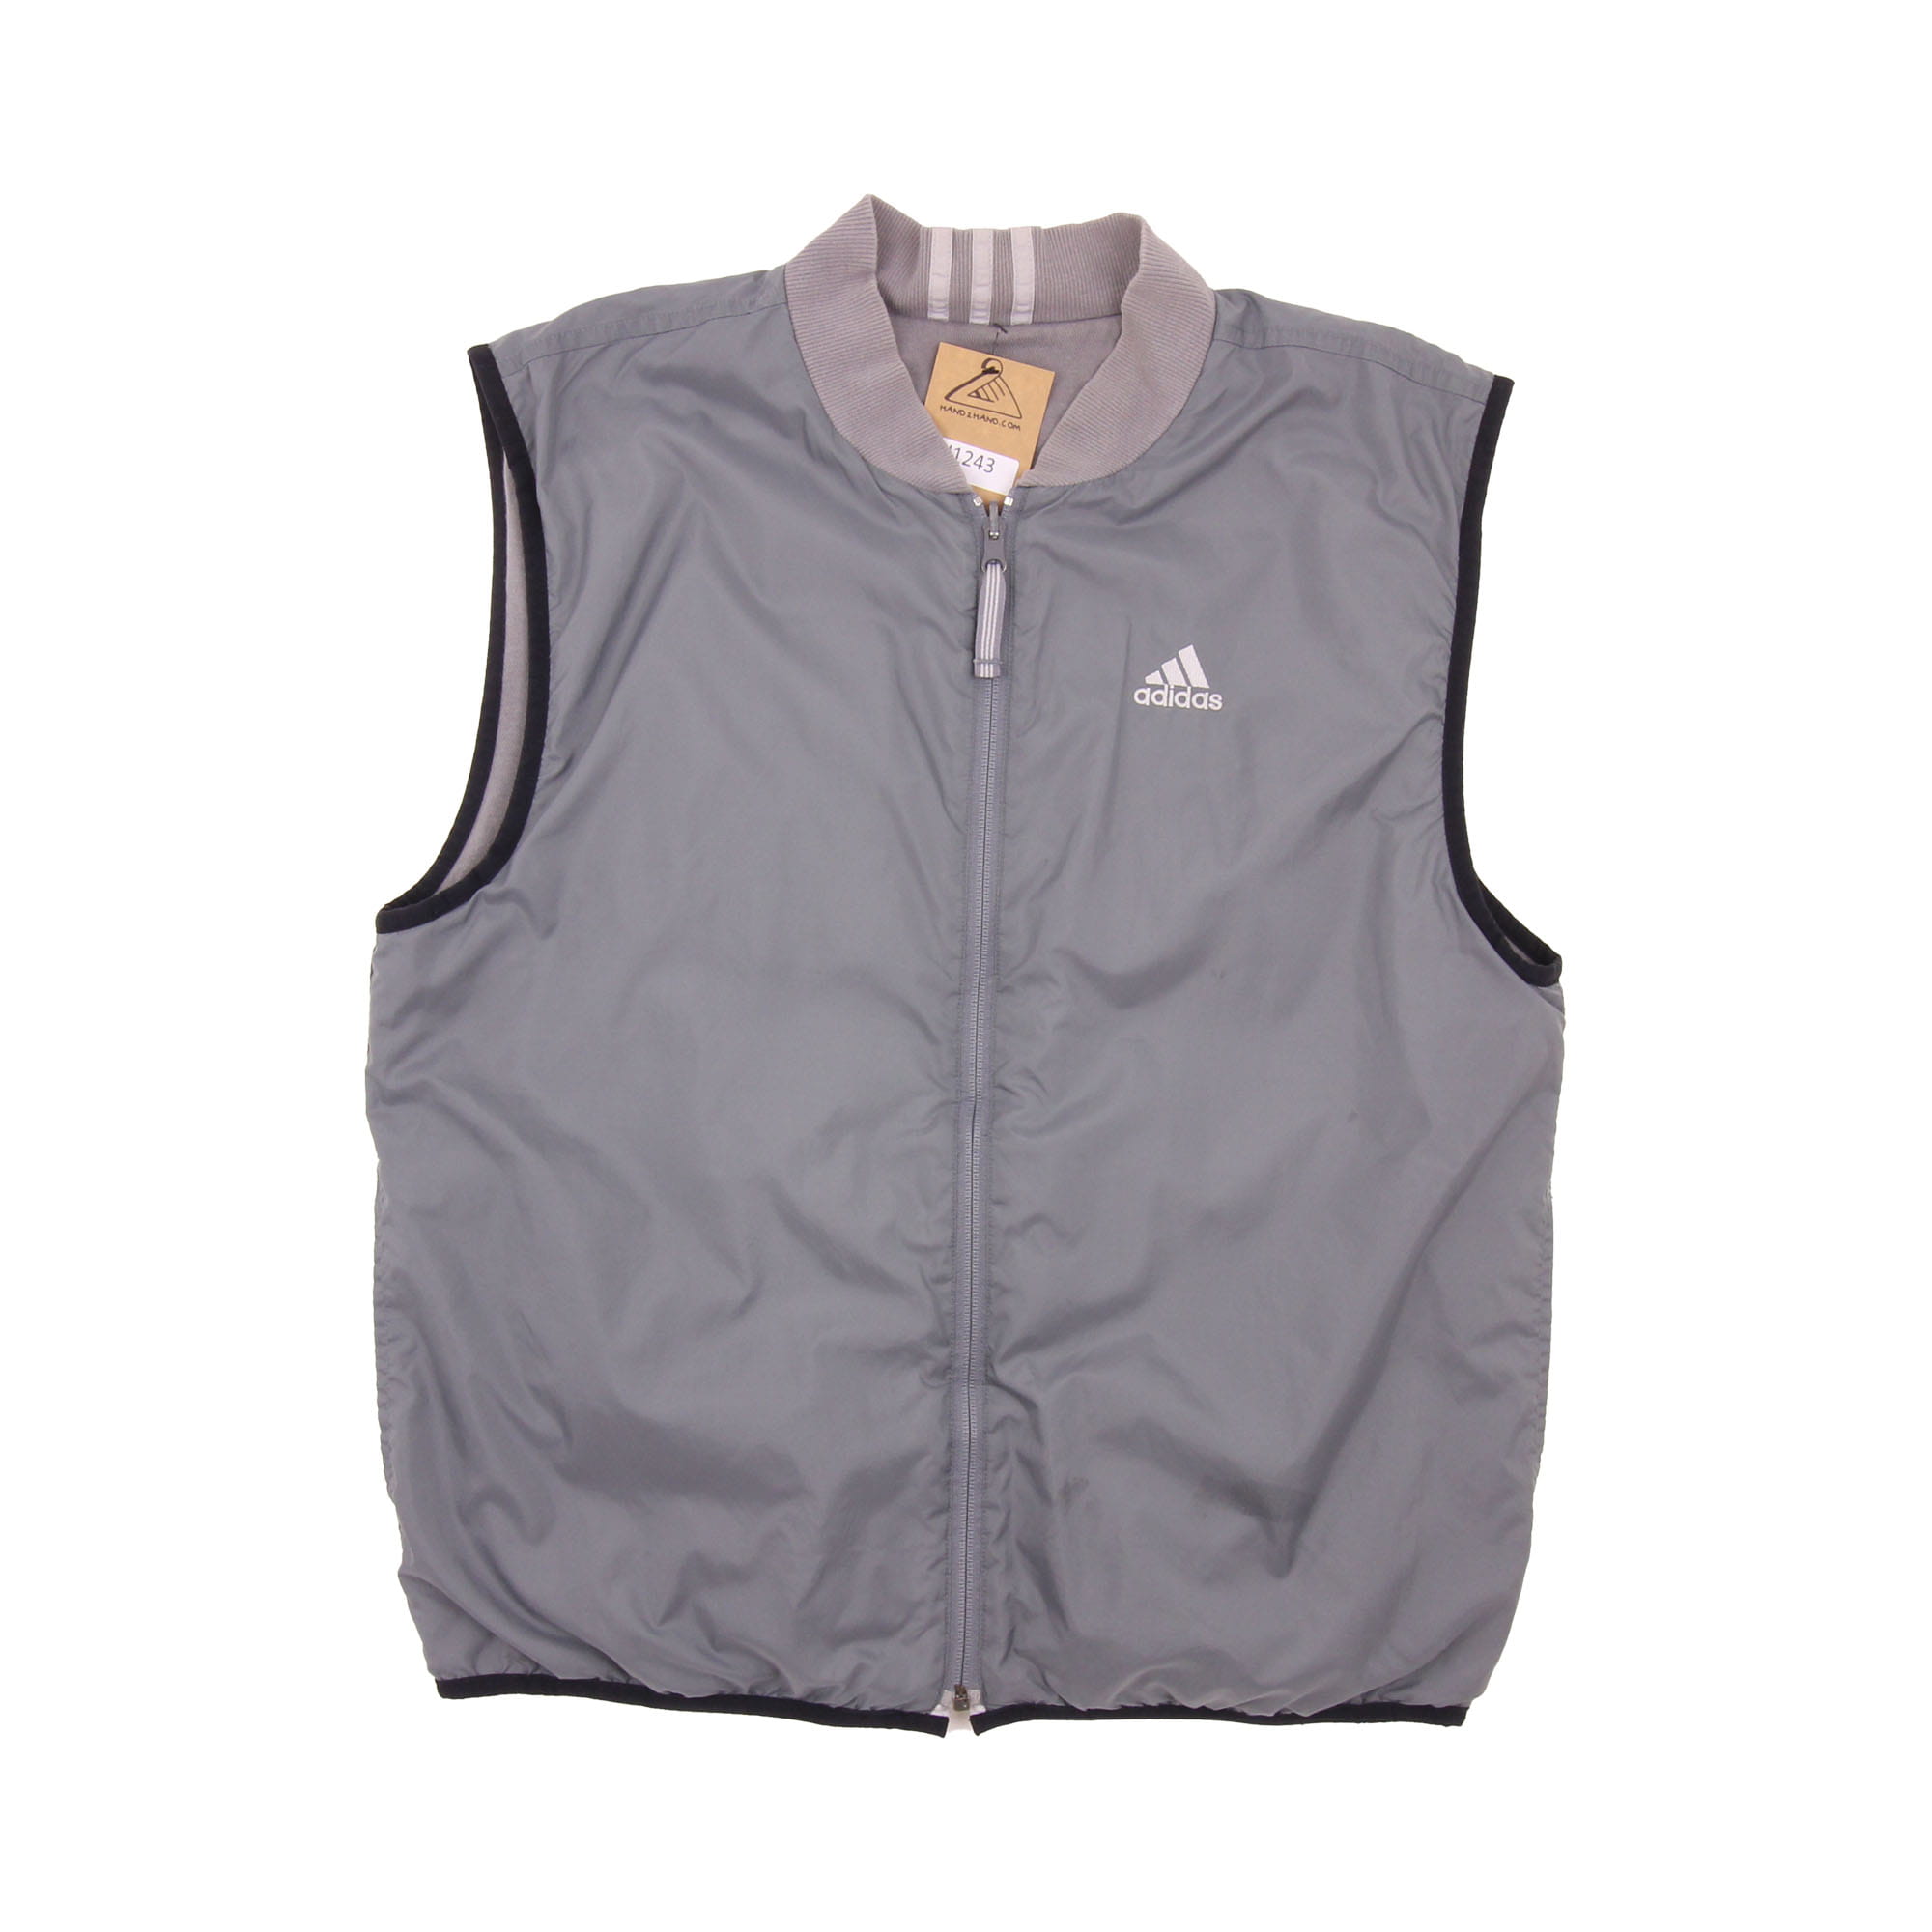 Adidas Embroidered Logo Gilet -  M/L